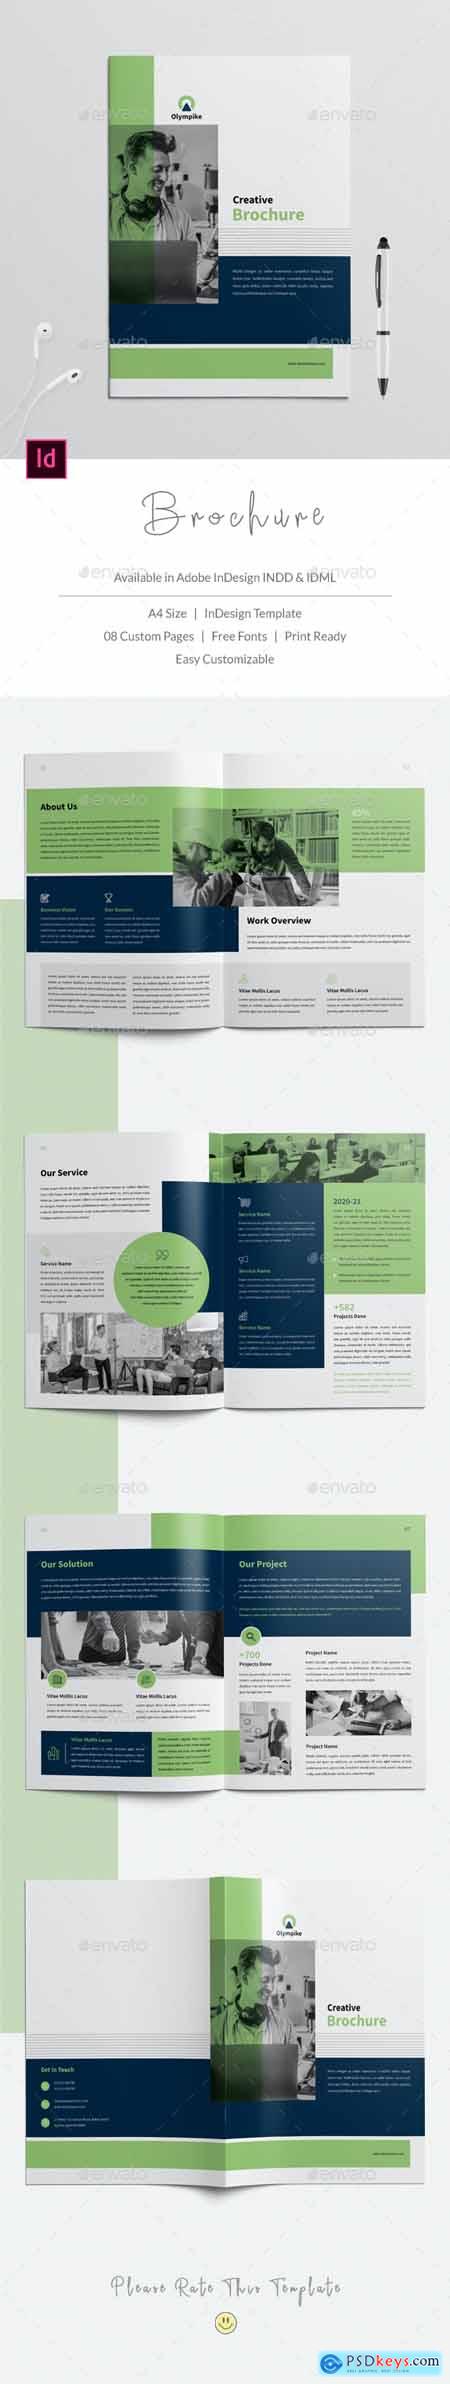 8 Pages Brochure 27537944